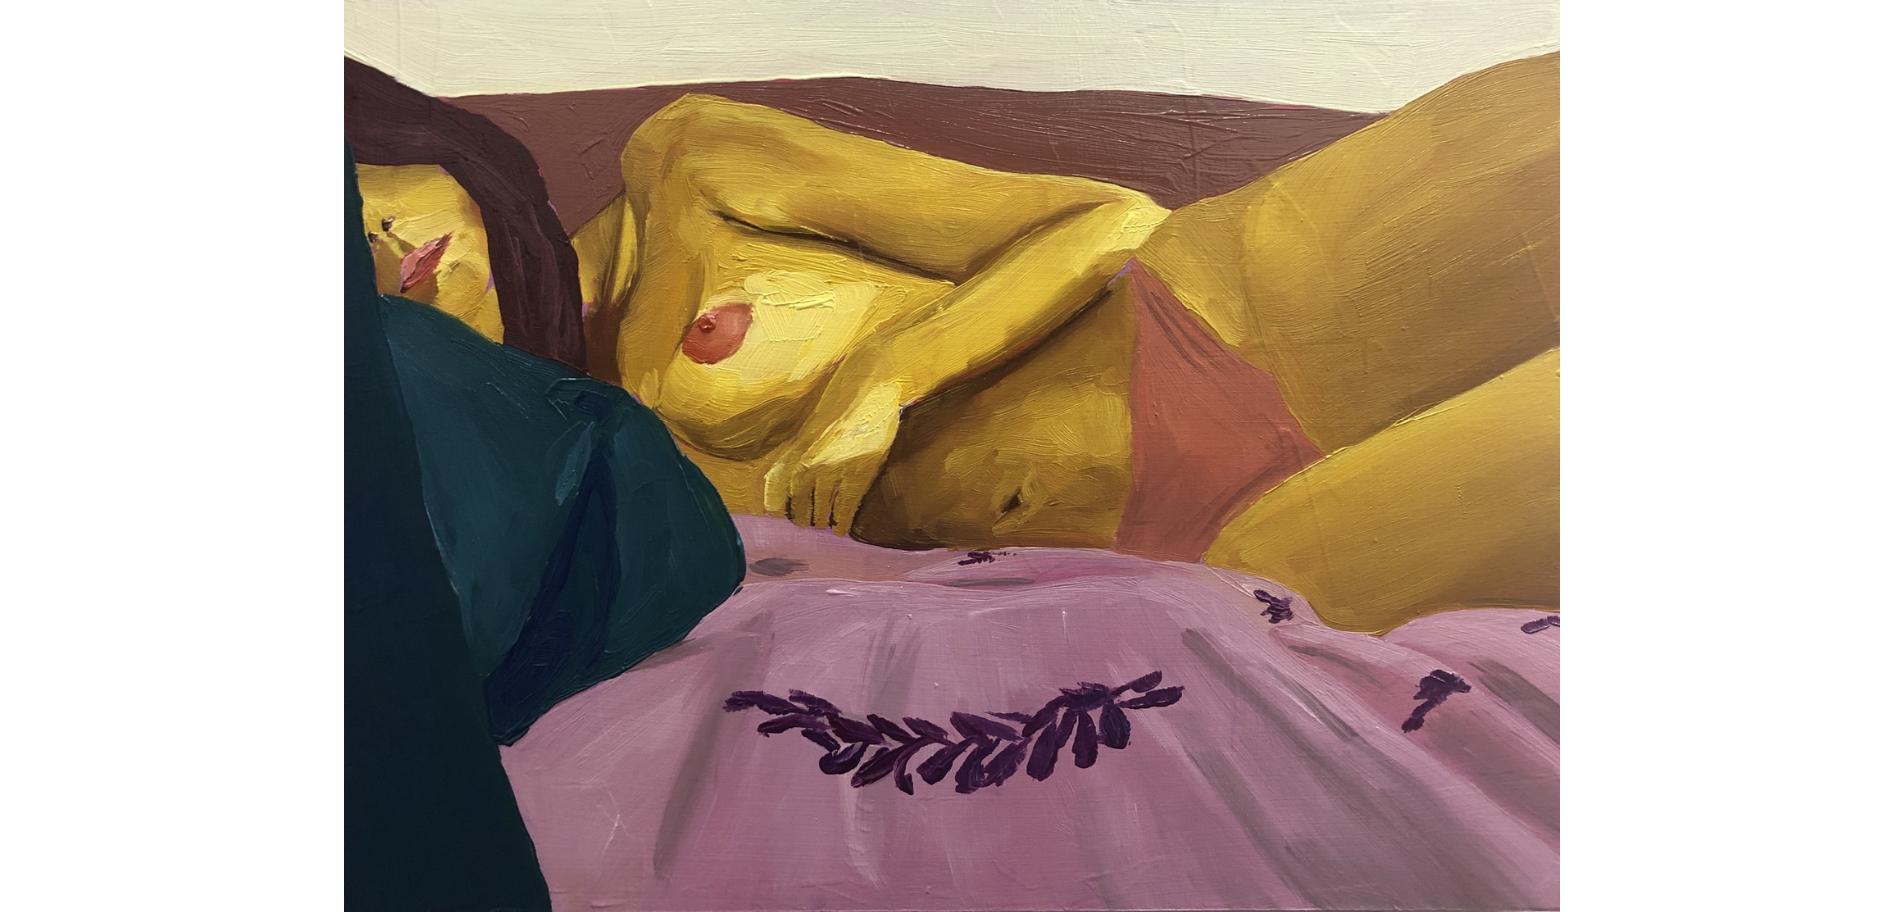 Study For Bedroom Scene 3, Oil painting on wood panel, figurative nude portrait - Feminist Painting by Jessica Rubin